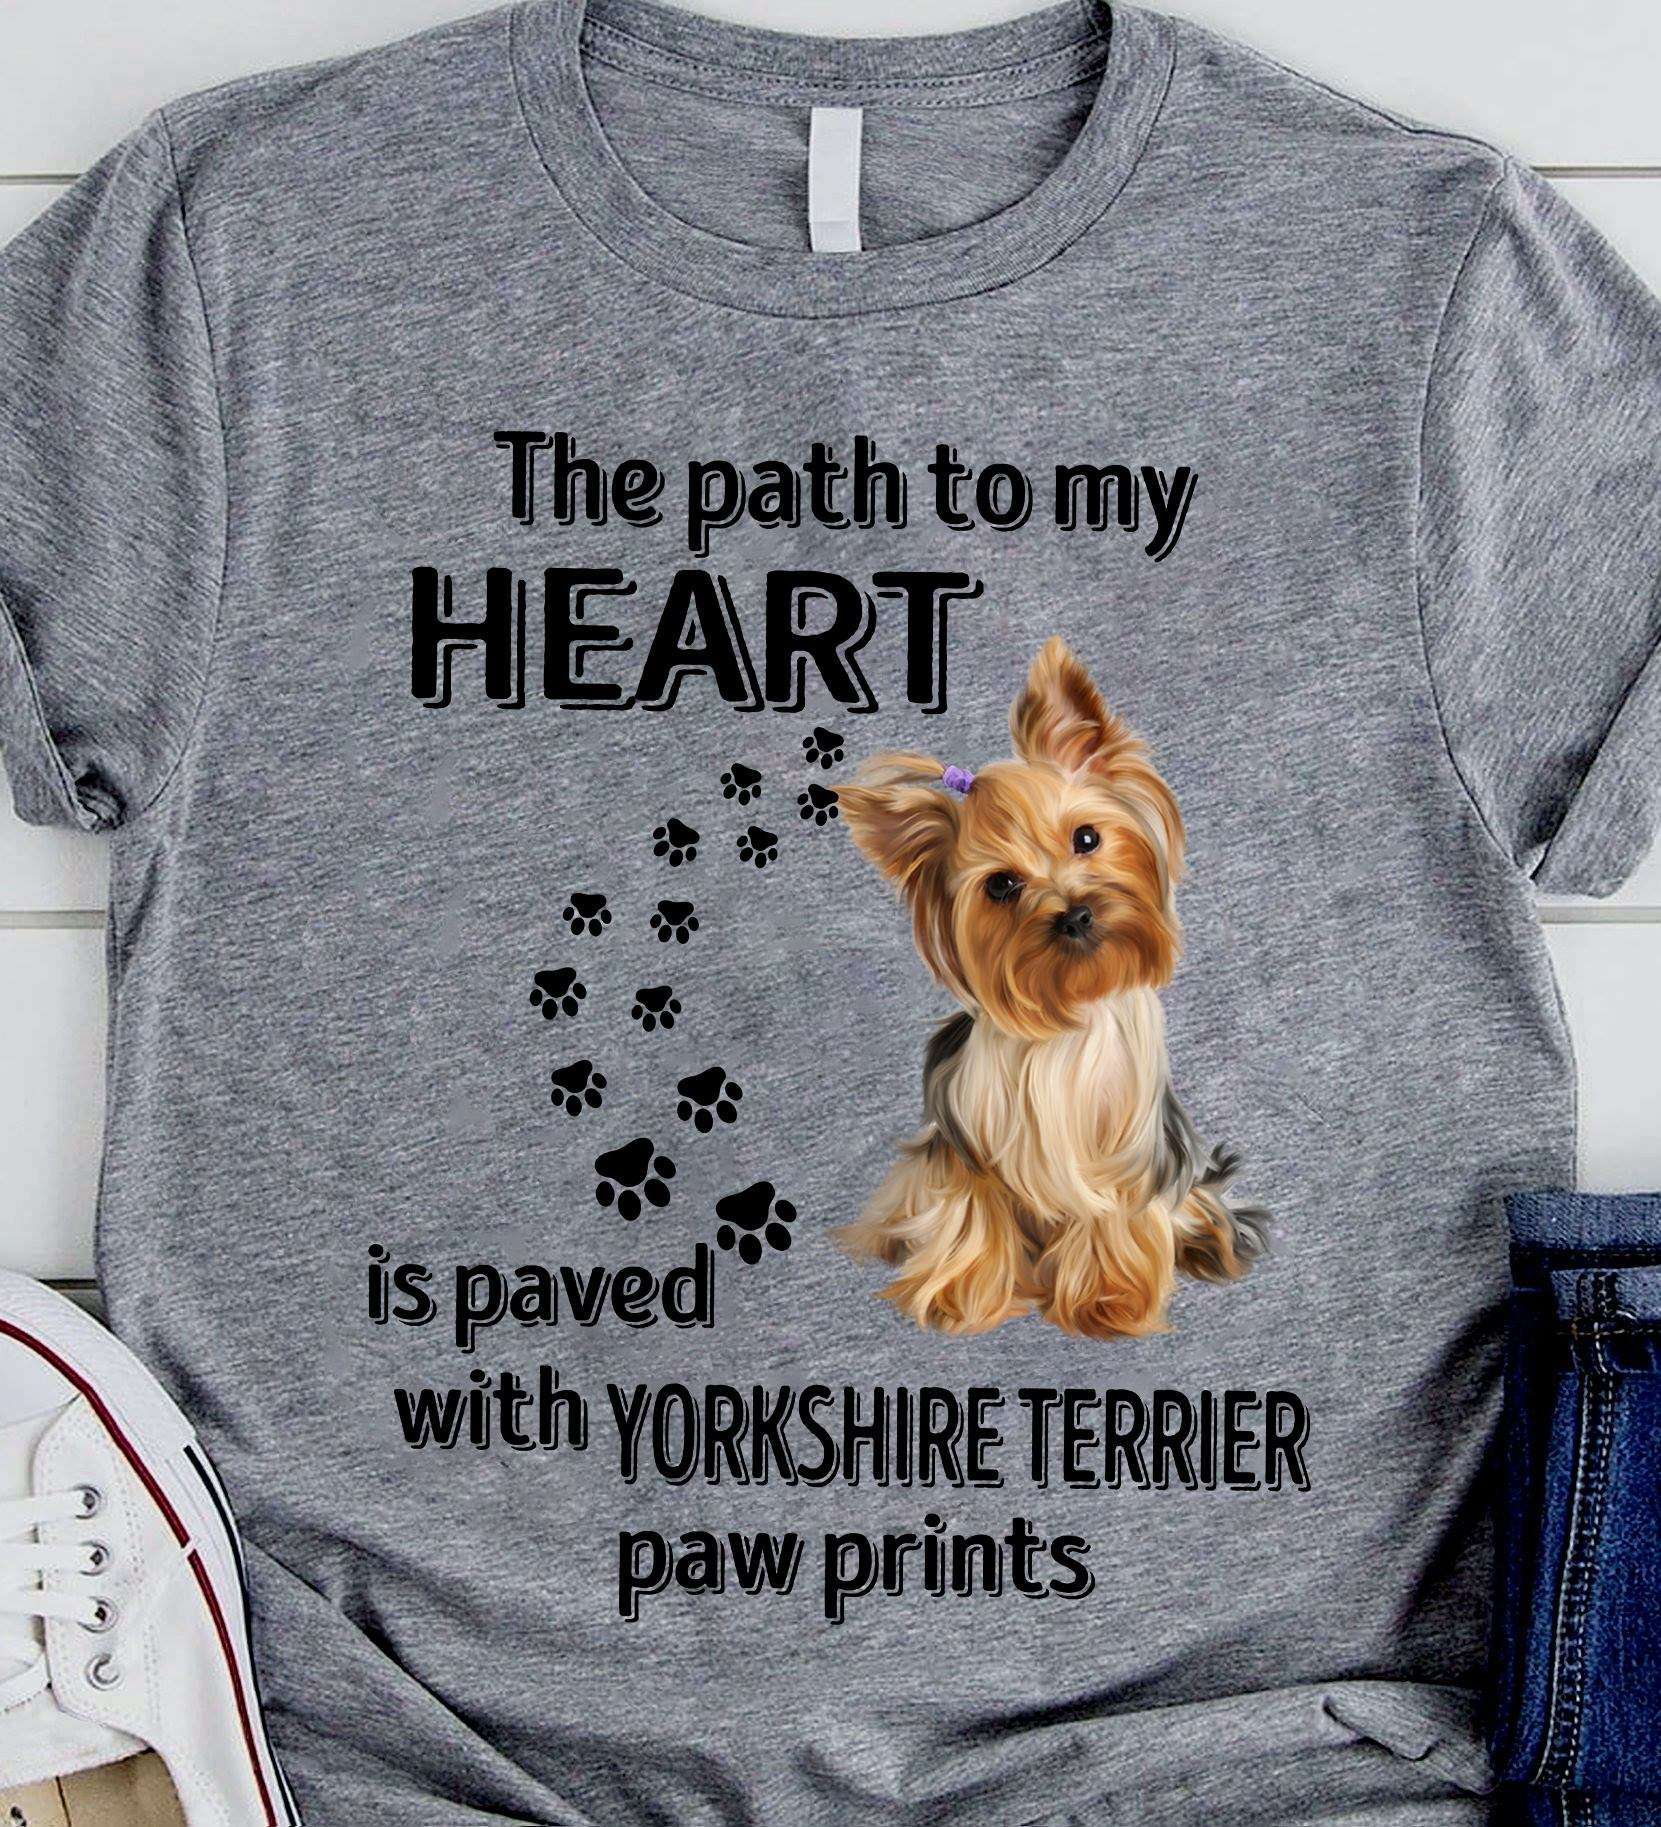 Yorkshire Terrier - The path to my heart is paved with yorkshire terrier paw prints